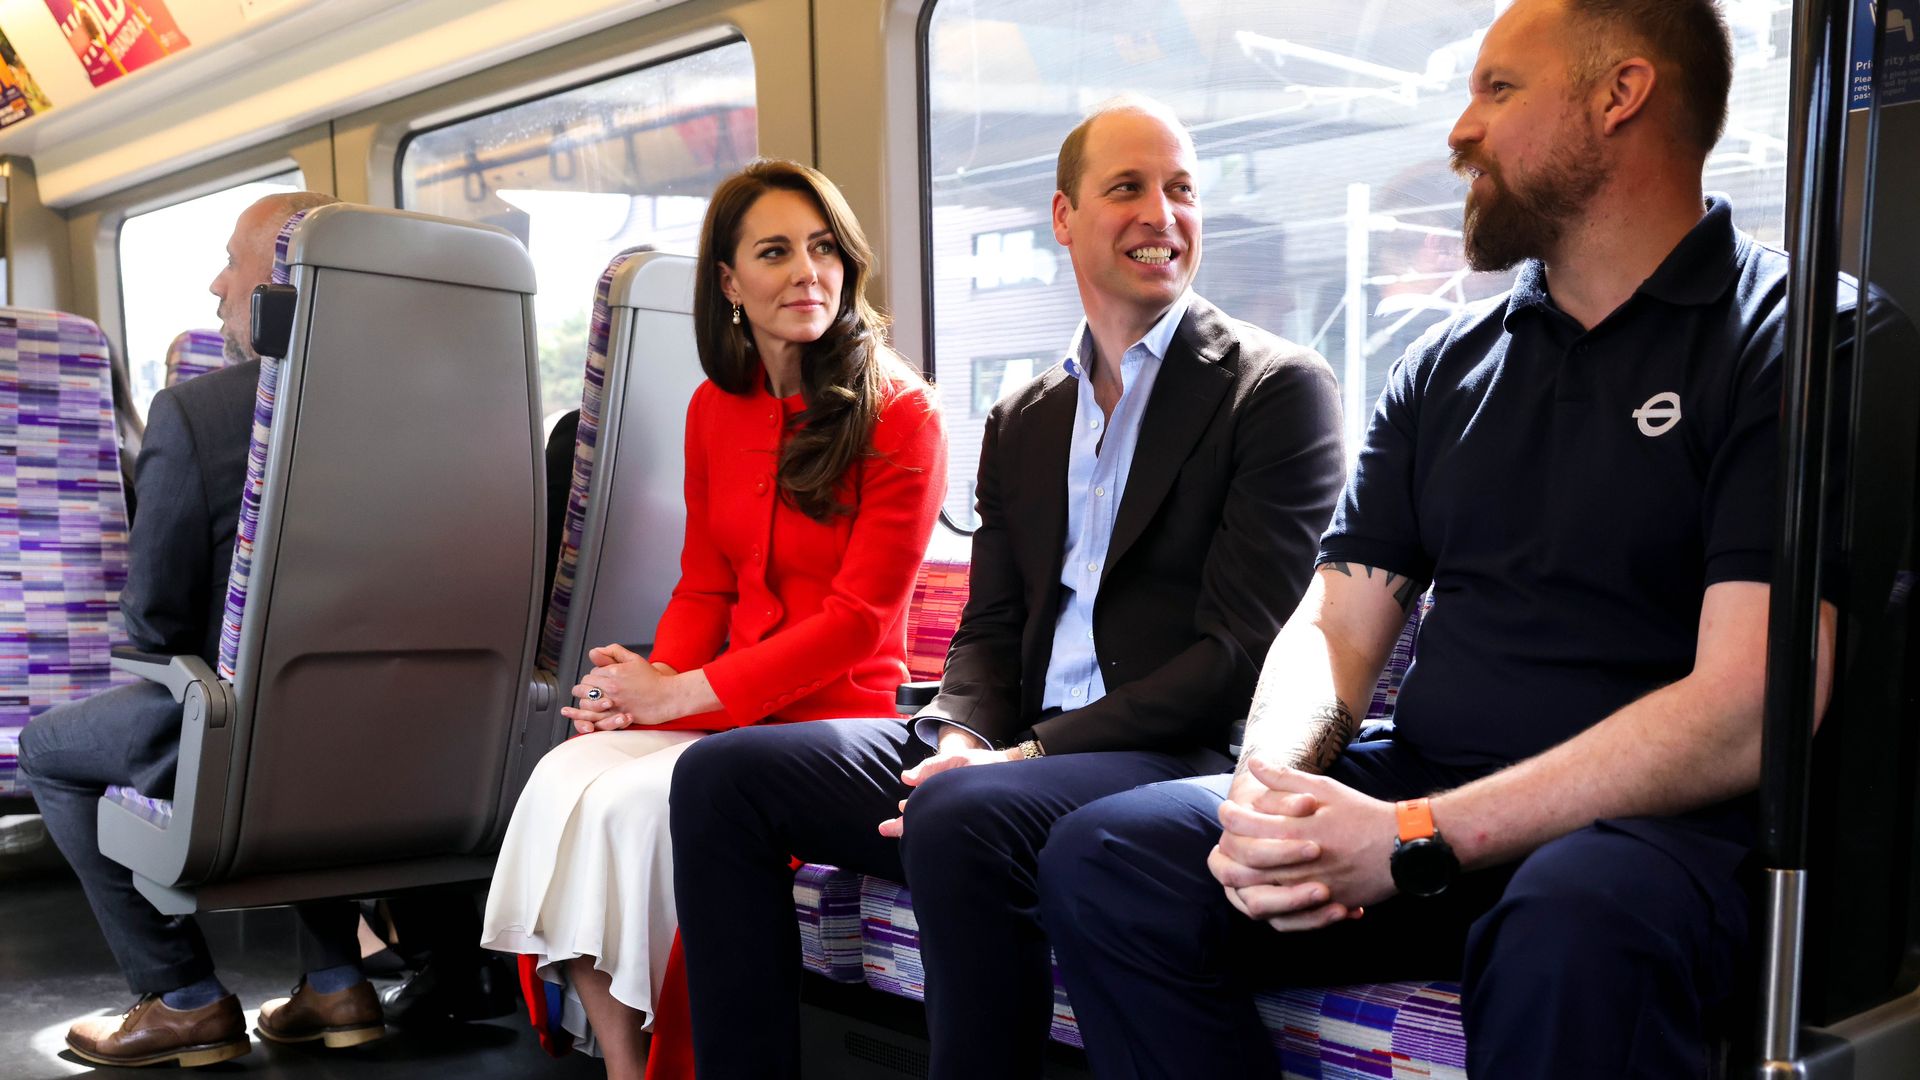 Prince WIlliam and Kate on the tube